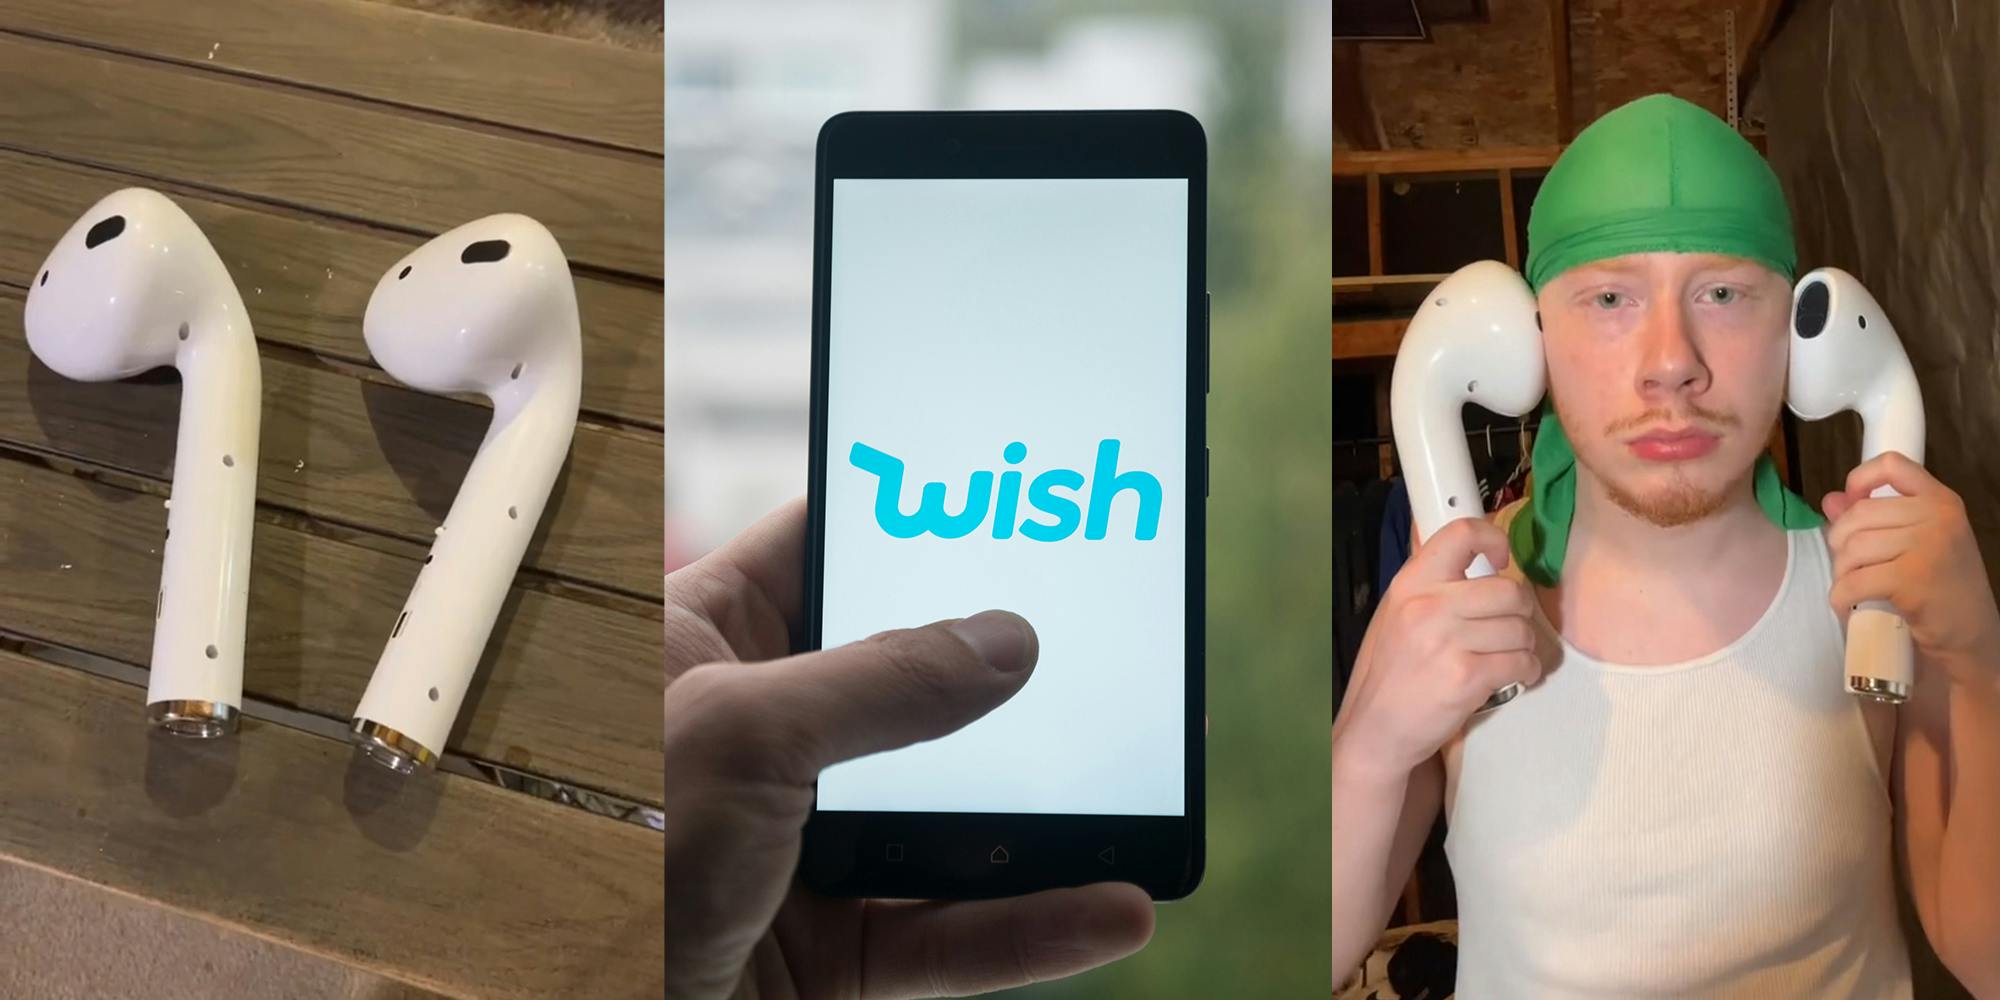 Apple AirPods From Wish.com. It Go Well